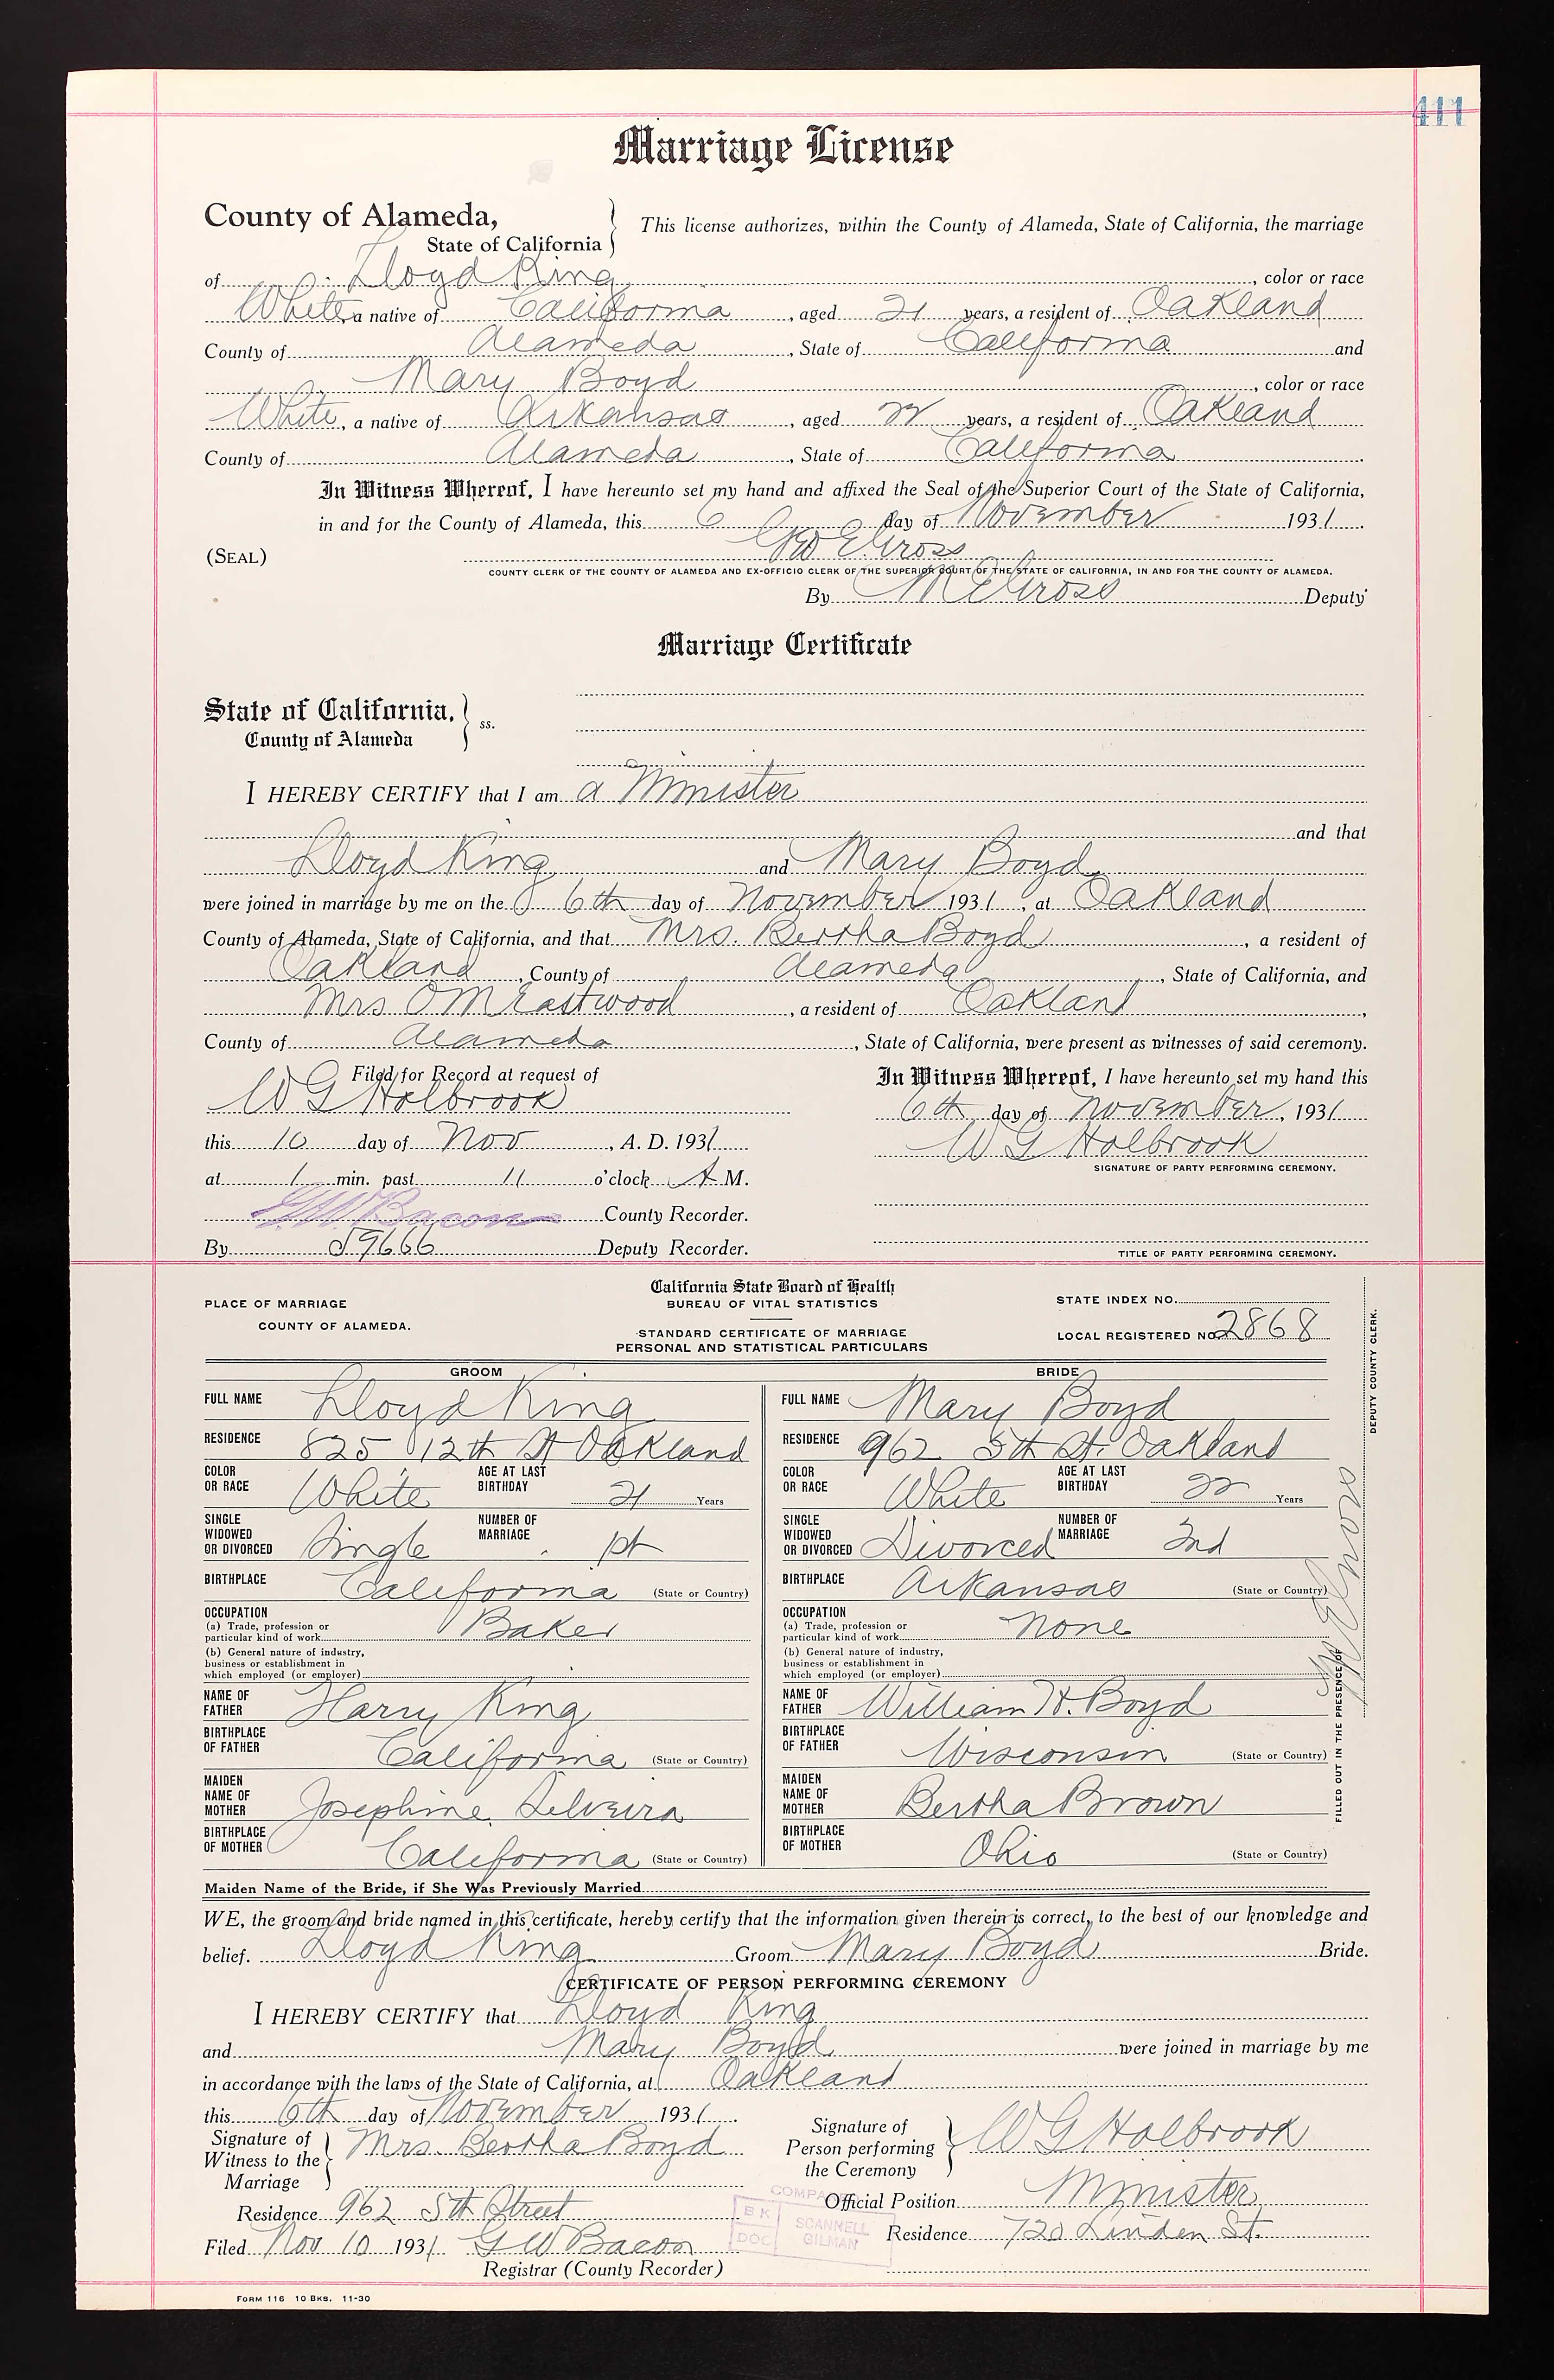 Marriage license and certificate of Lloyd King and Mary Boyd